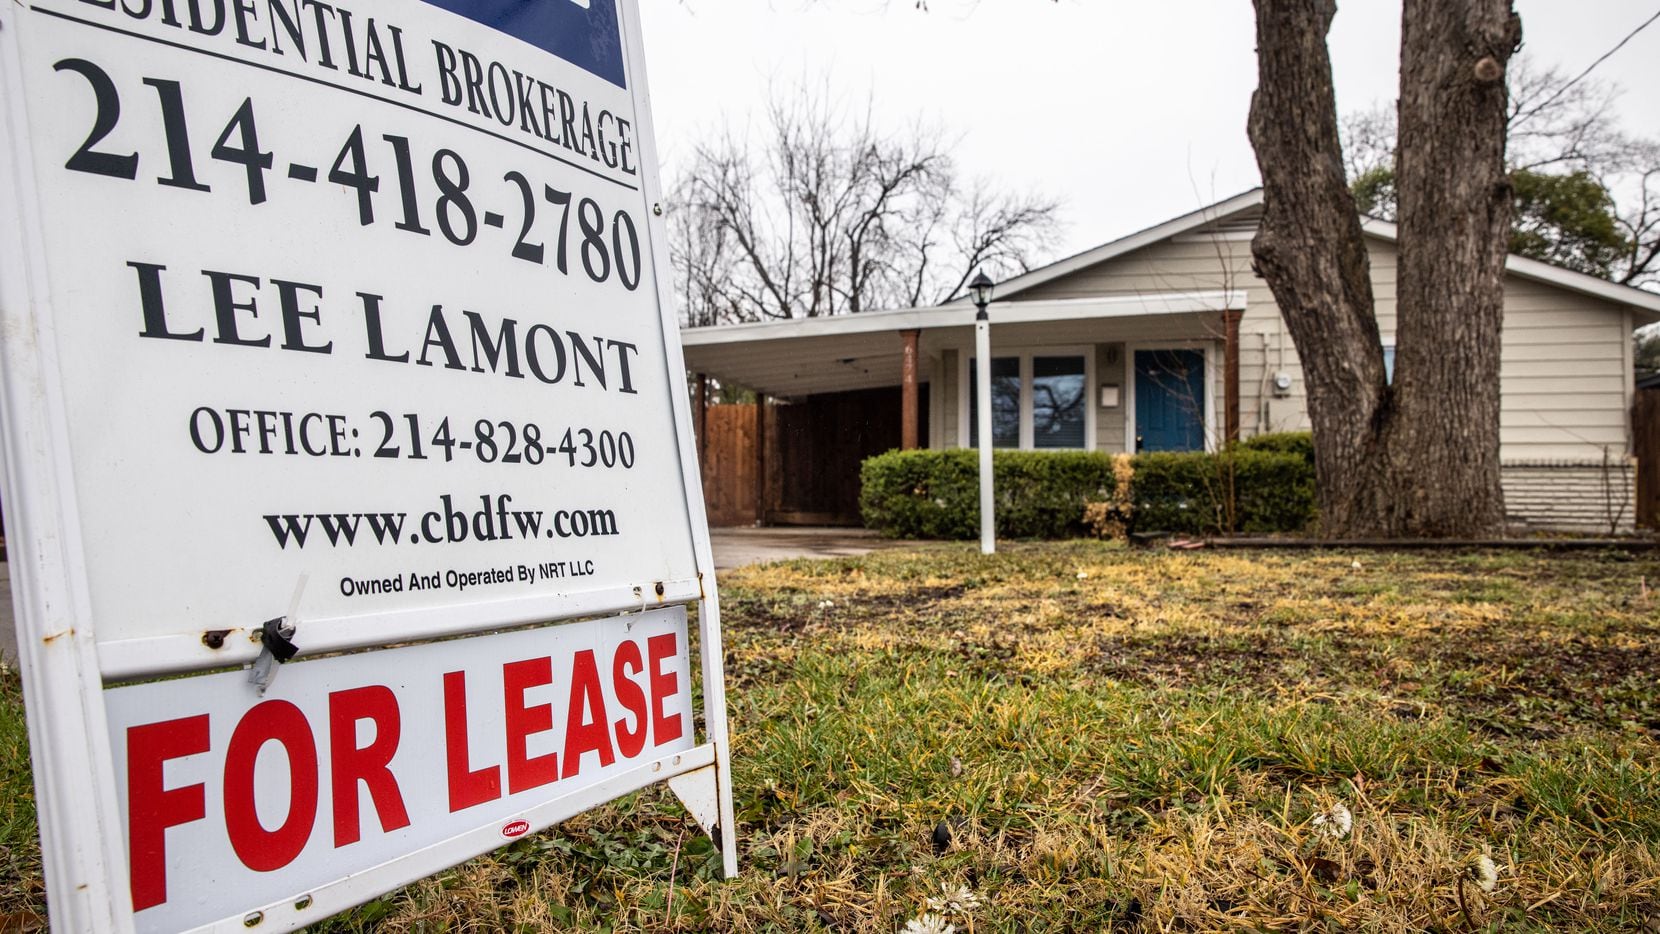 Median D-FW home rents now top $1,900 a month.